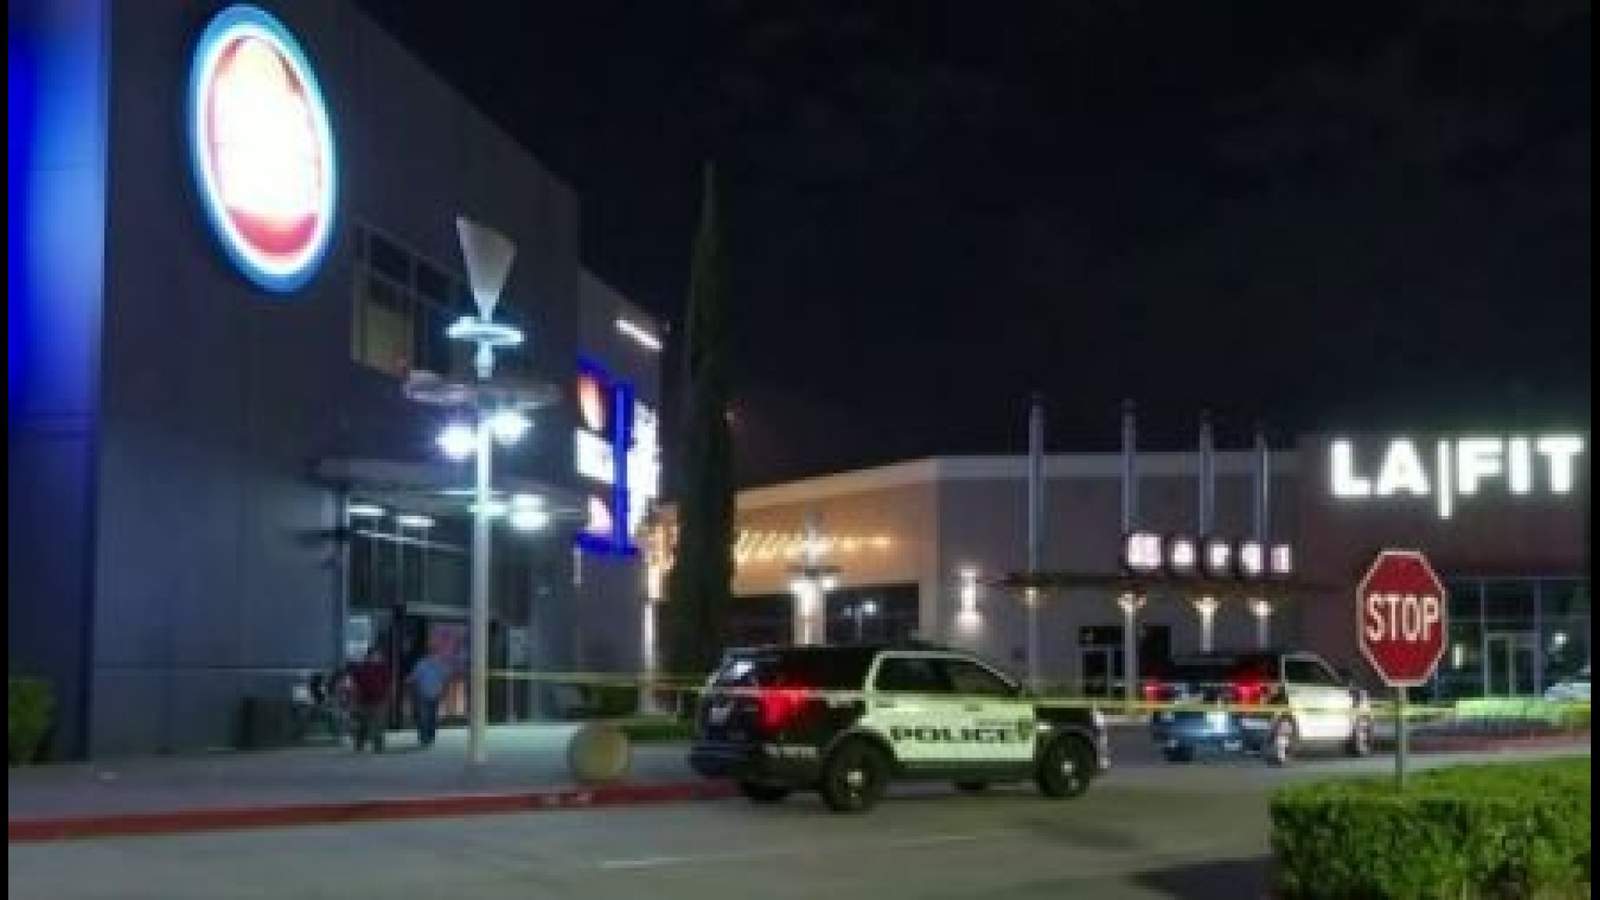 Man dies after being shot in front of daughter at Dave and Buster’s on Katy Freeway, police say